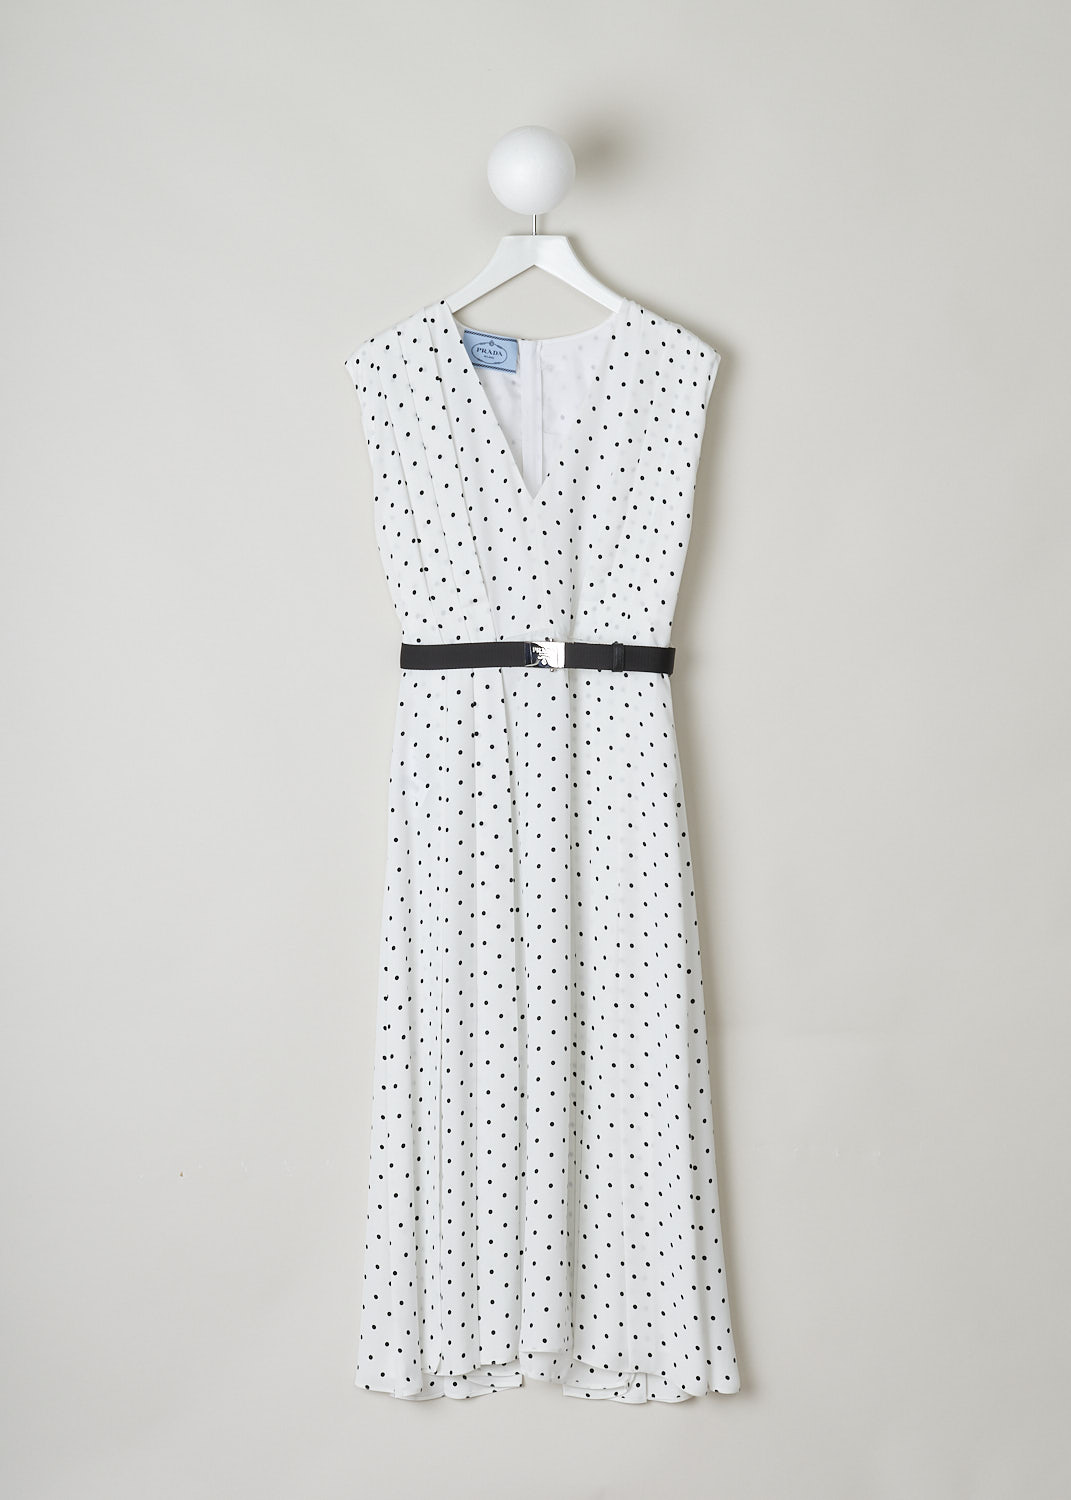 PRADA, WHITE POLKA-DOT MIDI DRESS WITH BELT, TWILL_FLUIDO_PO_P3D12H_F0A72_AVORIO_NERO, Black, White, Print, Front, This sleeveless silk dress has a white base with a black polka-dot print. The bodice has a V-neckline and pleats that go down into the skirt. A black canvas belt with a silver buckle can be used to cinch in the waist. A concealed centre zip in the back functions as the closure option. The dress comes with a detachable slip dress. 
